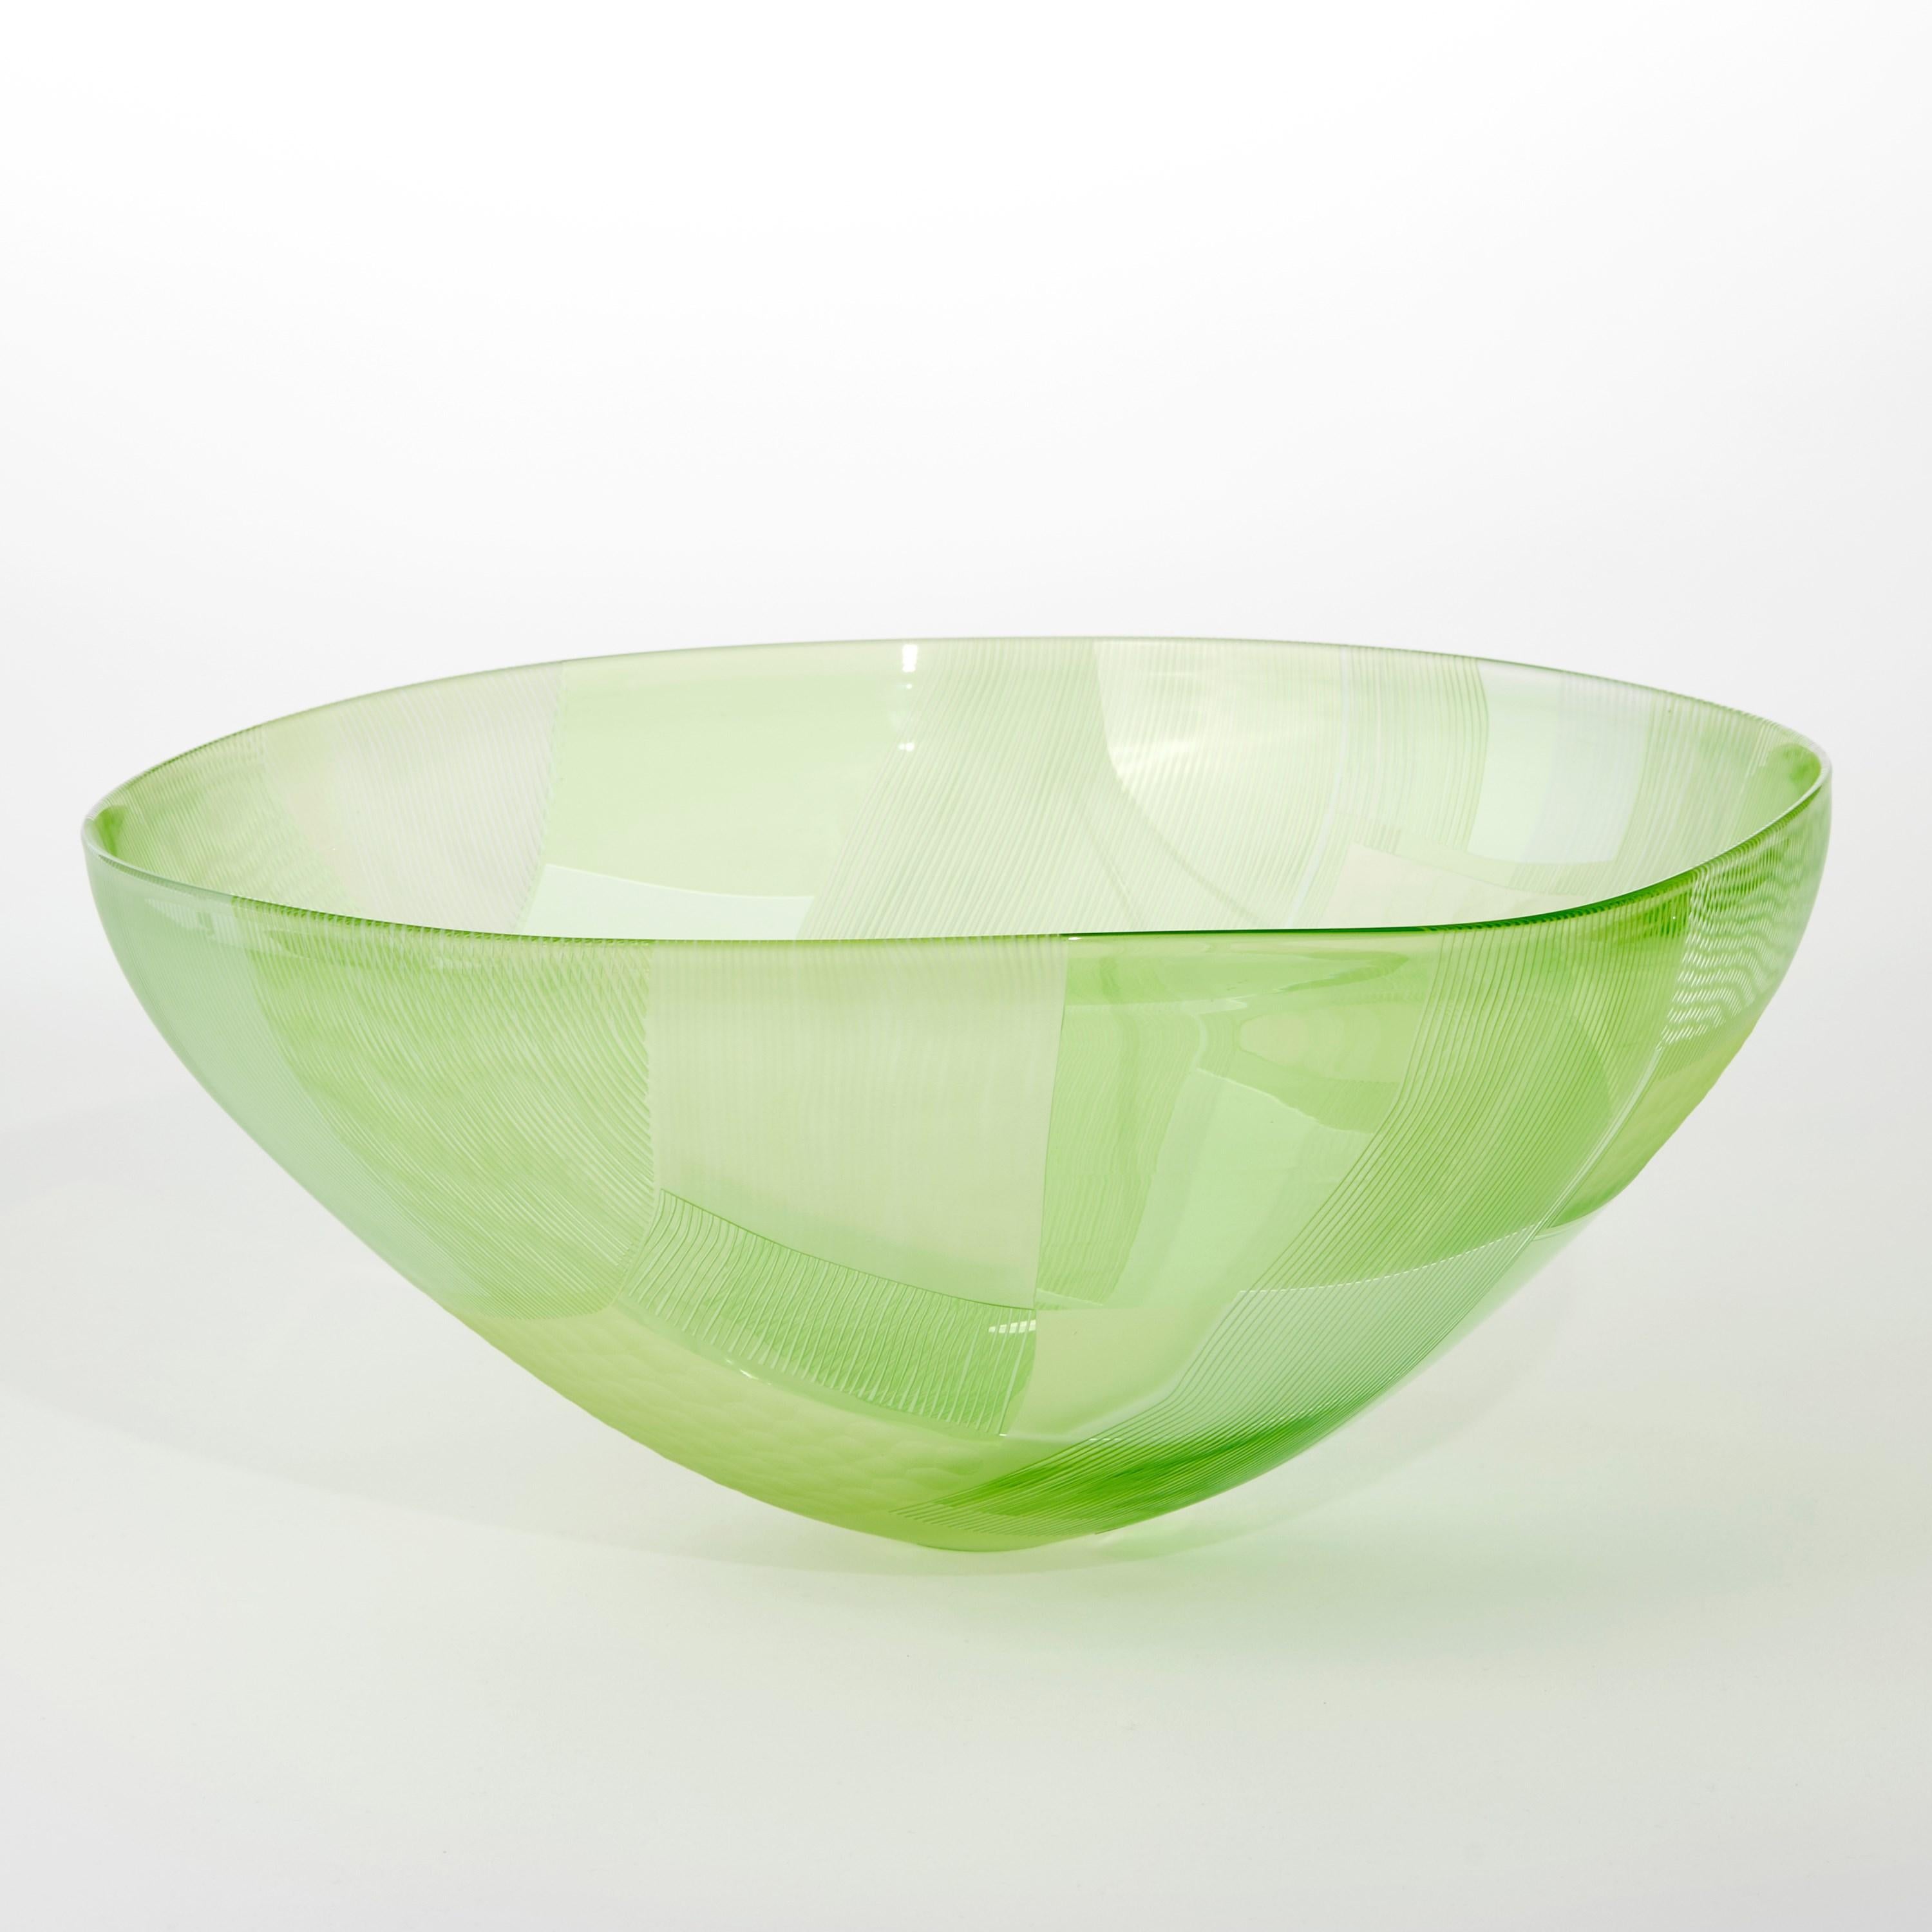 Organic Modern Abstracted Land Moss Green over Spring Green, a cut glass bowl by Kate Jones